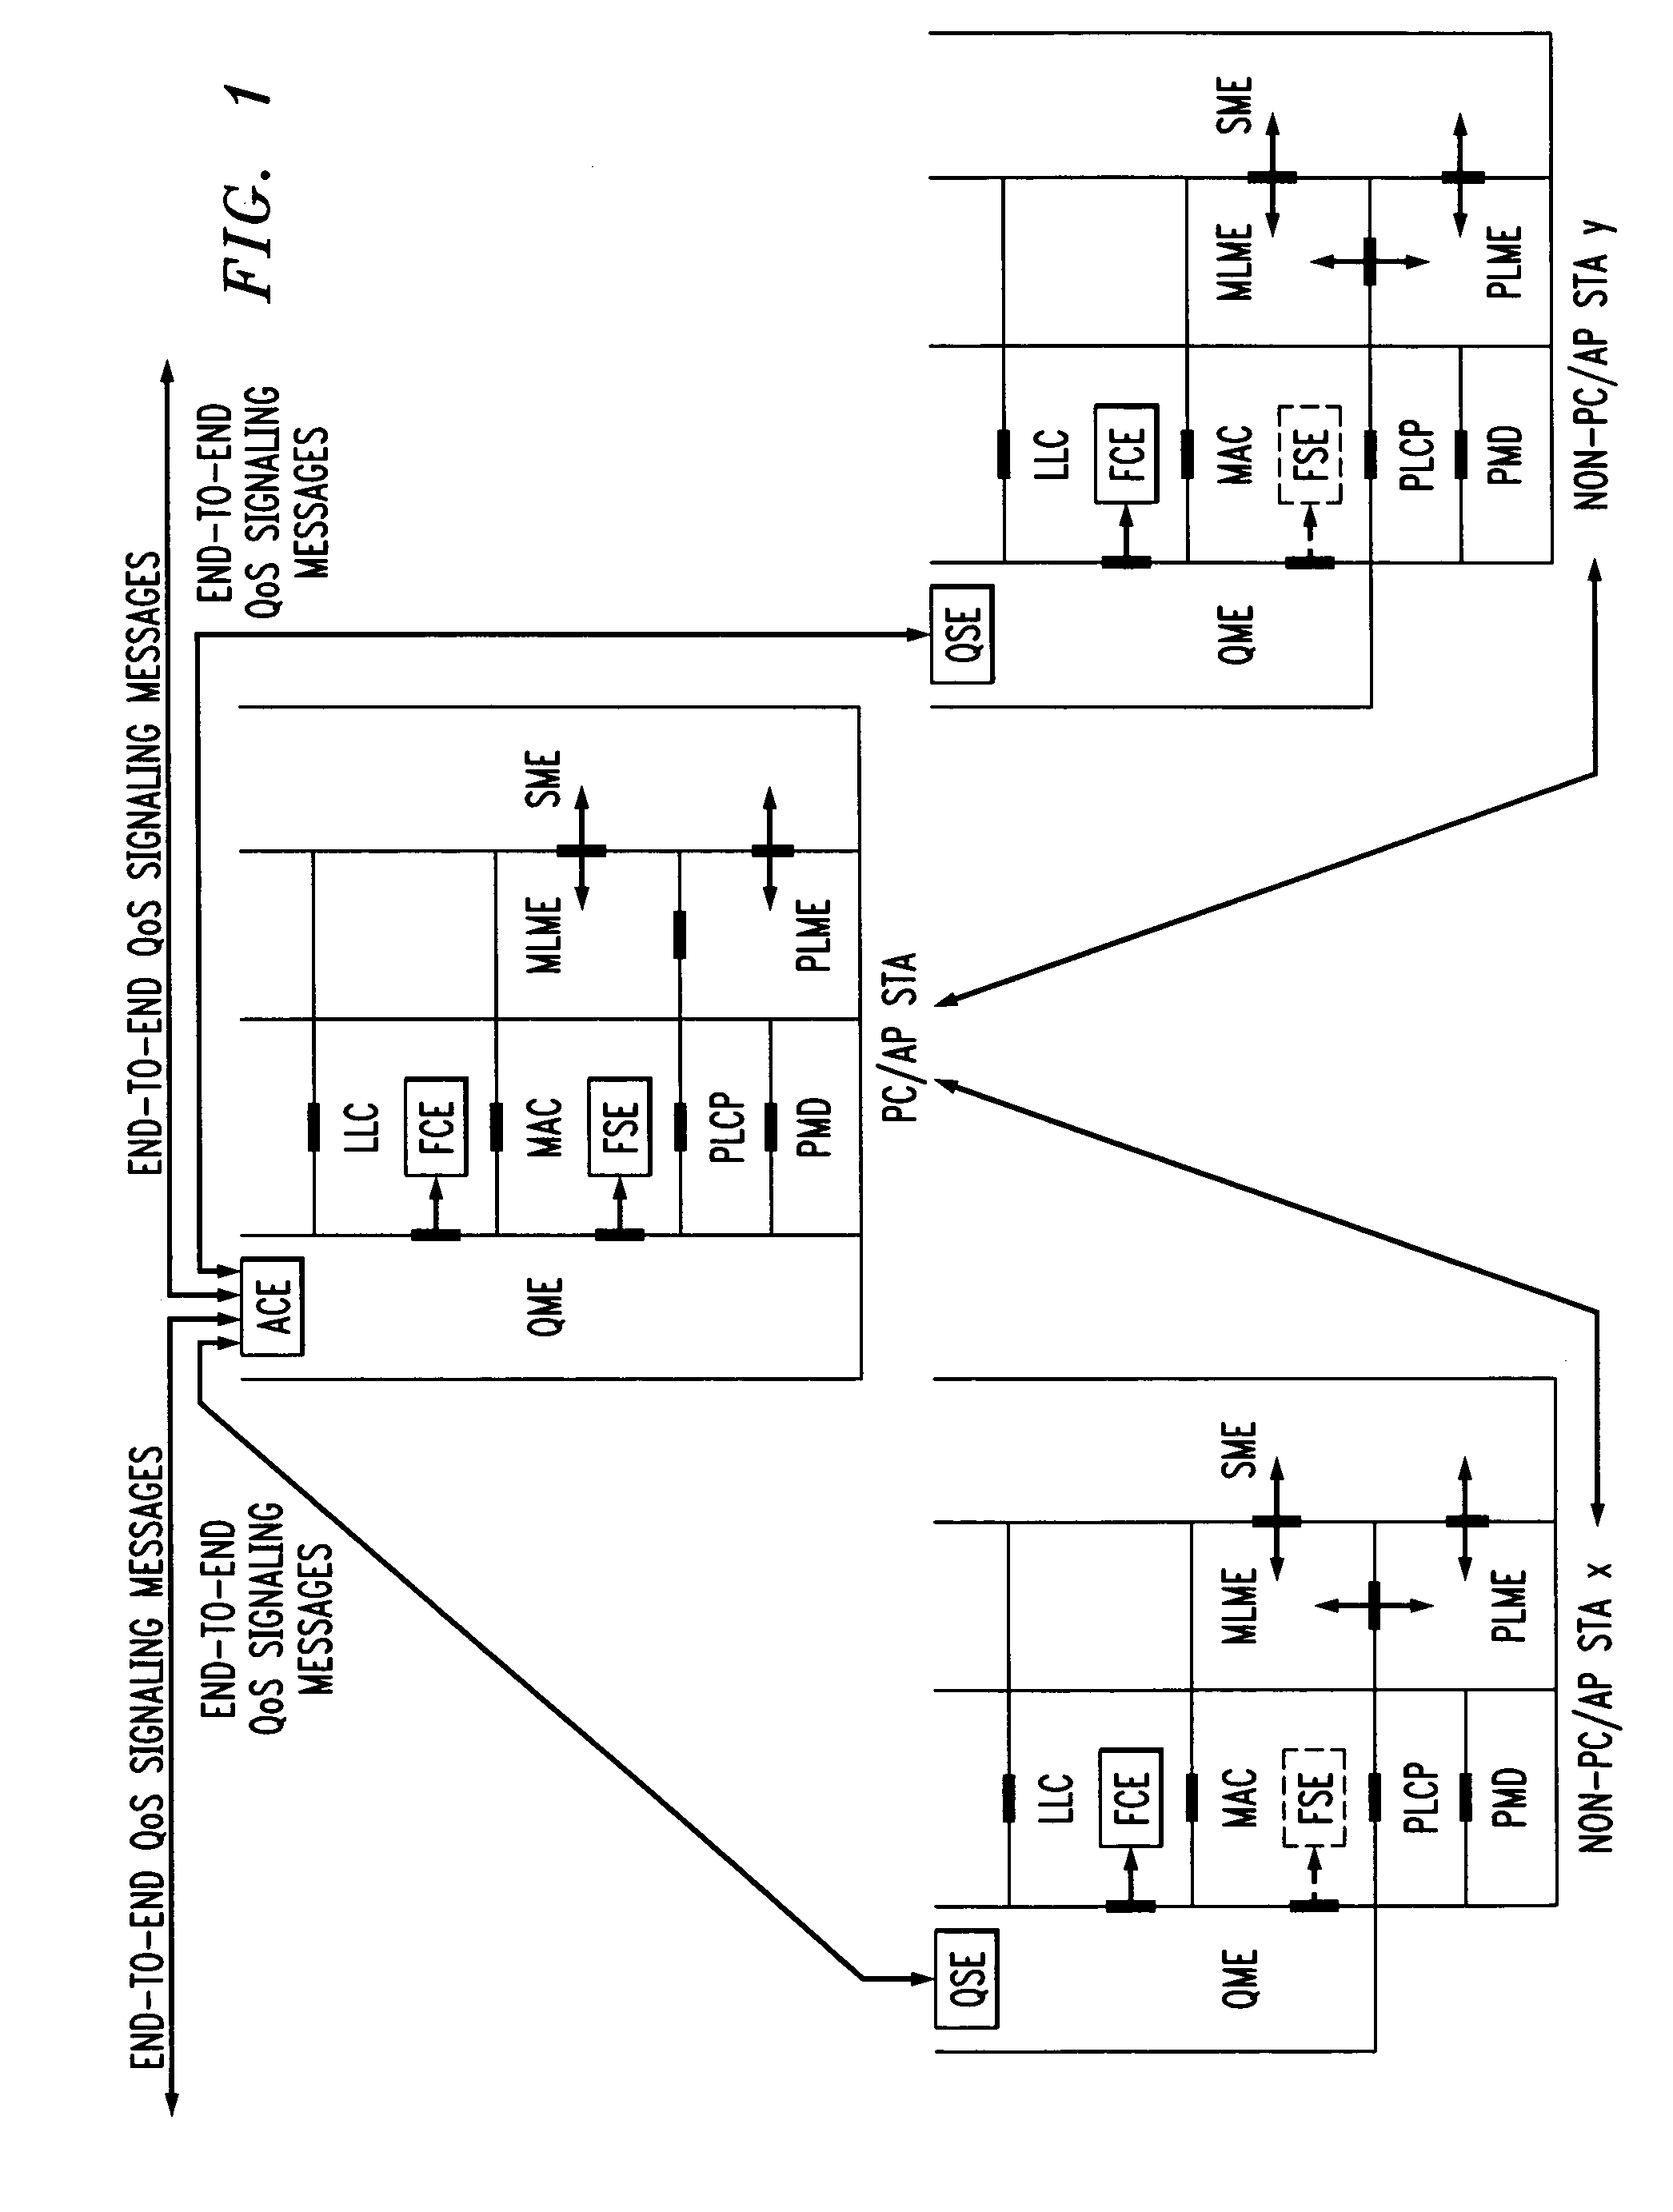 In-band QoS signaling reference model for QoS-driven wireless LANs